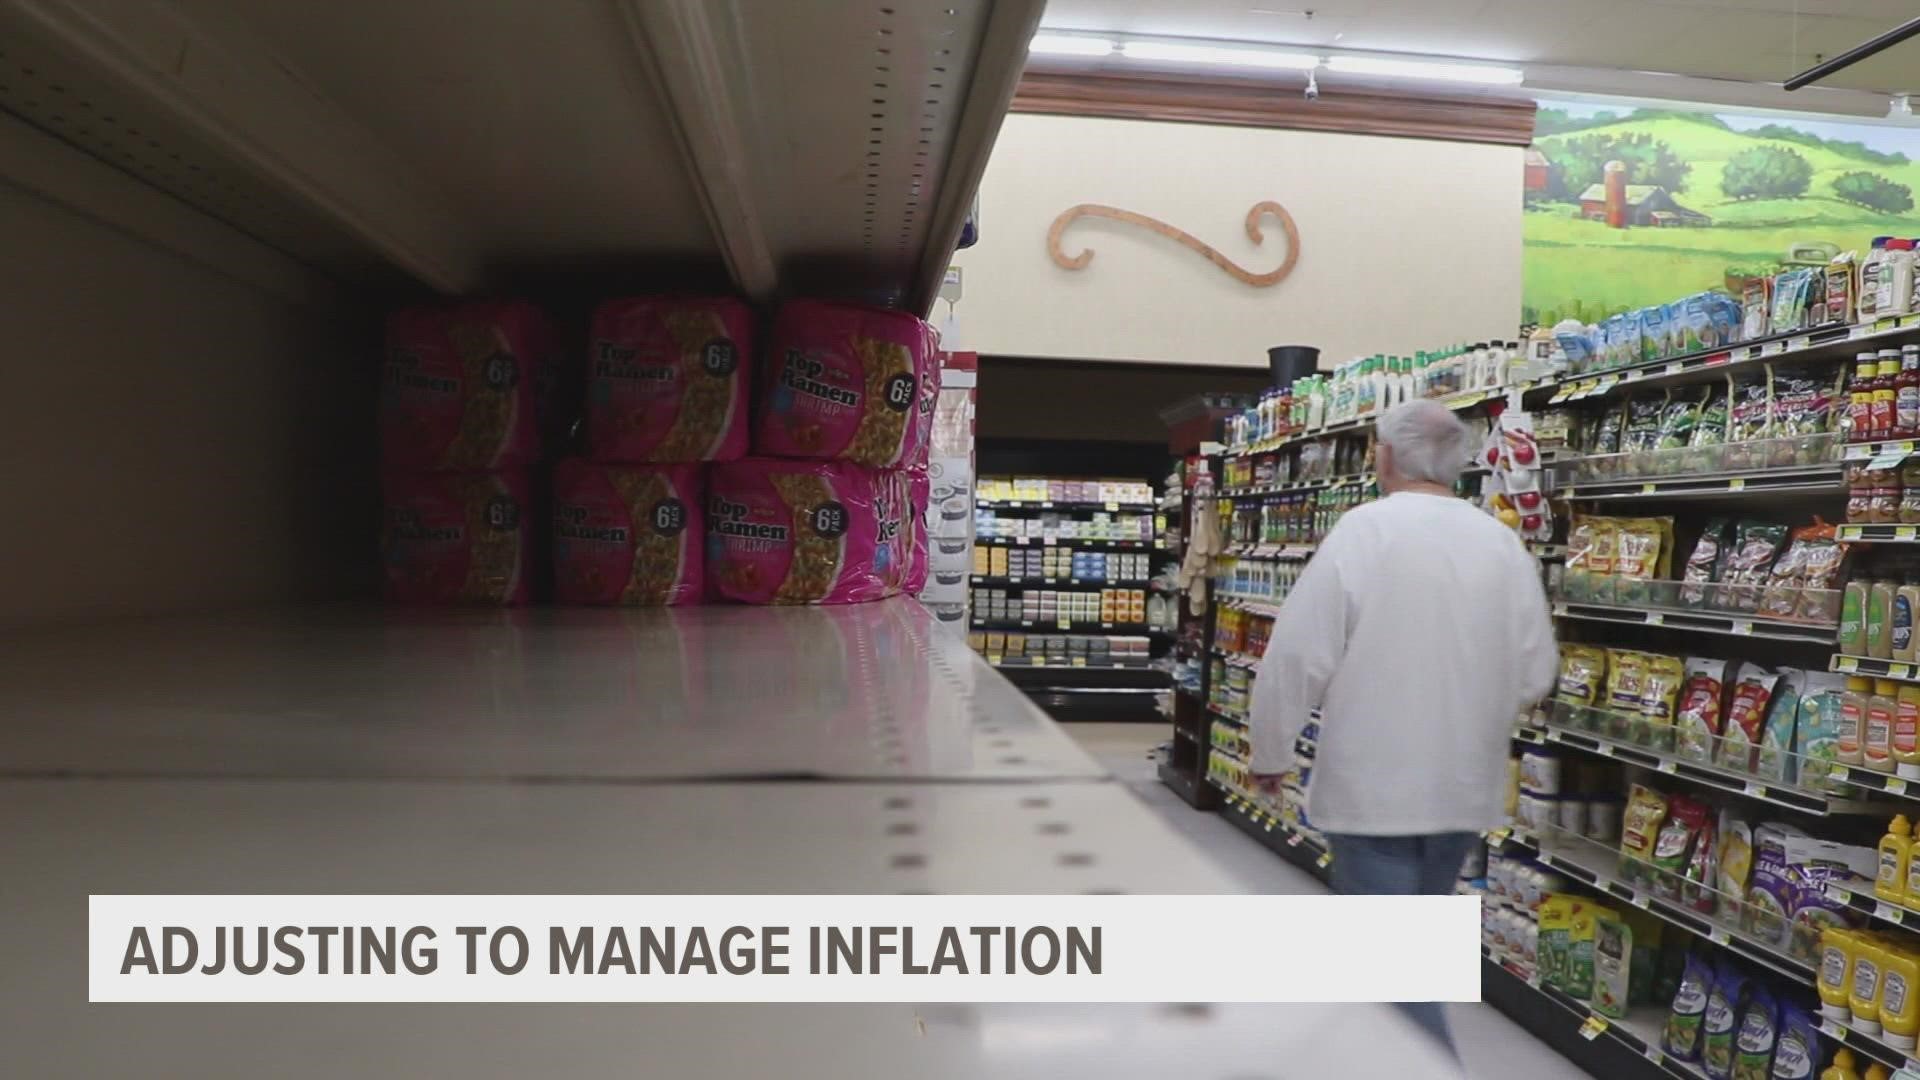 An ISU economist gives recommendations on how to manage inflation if people are struggling.